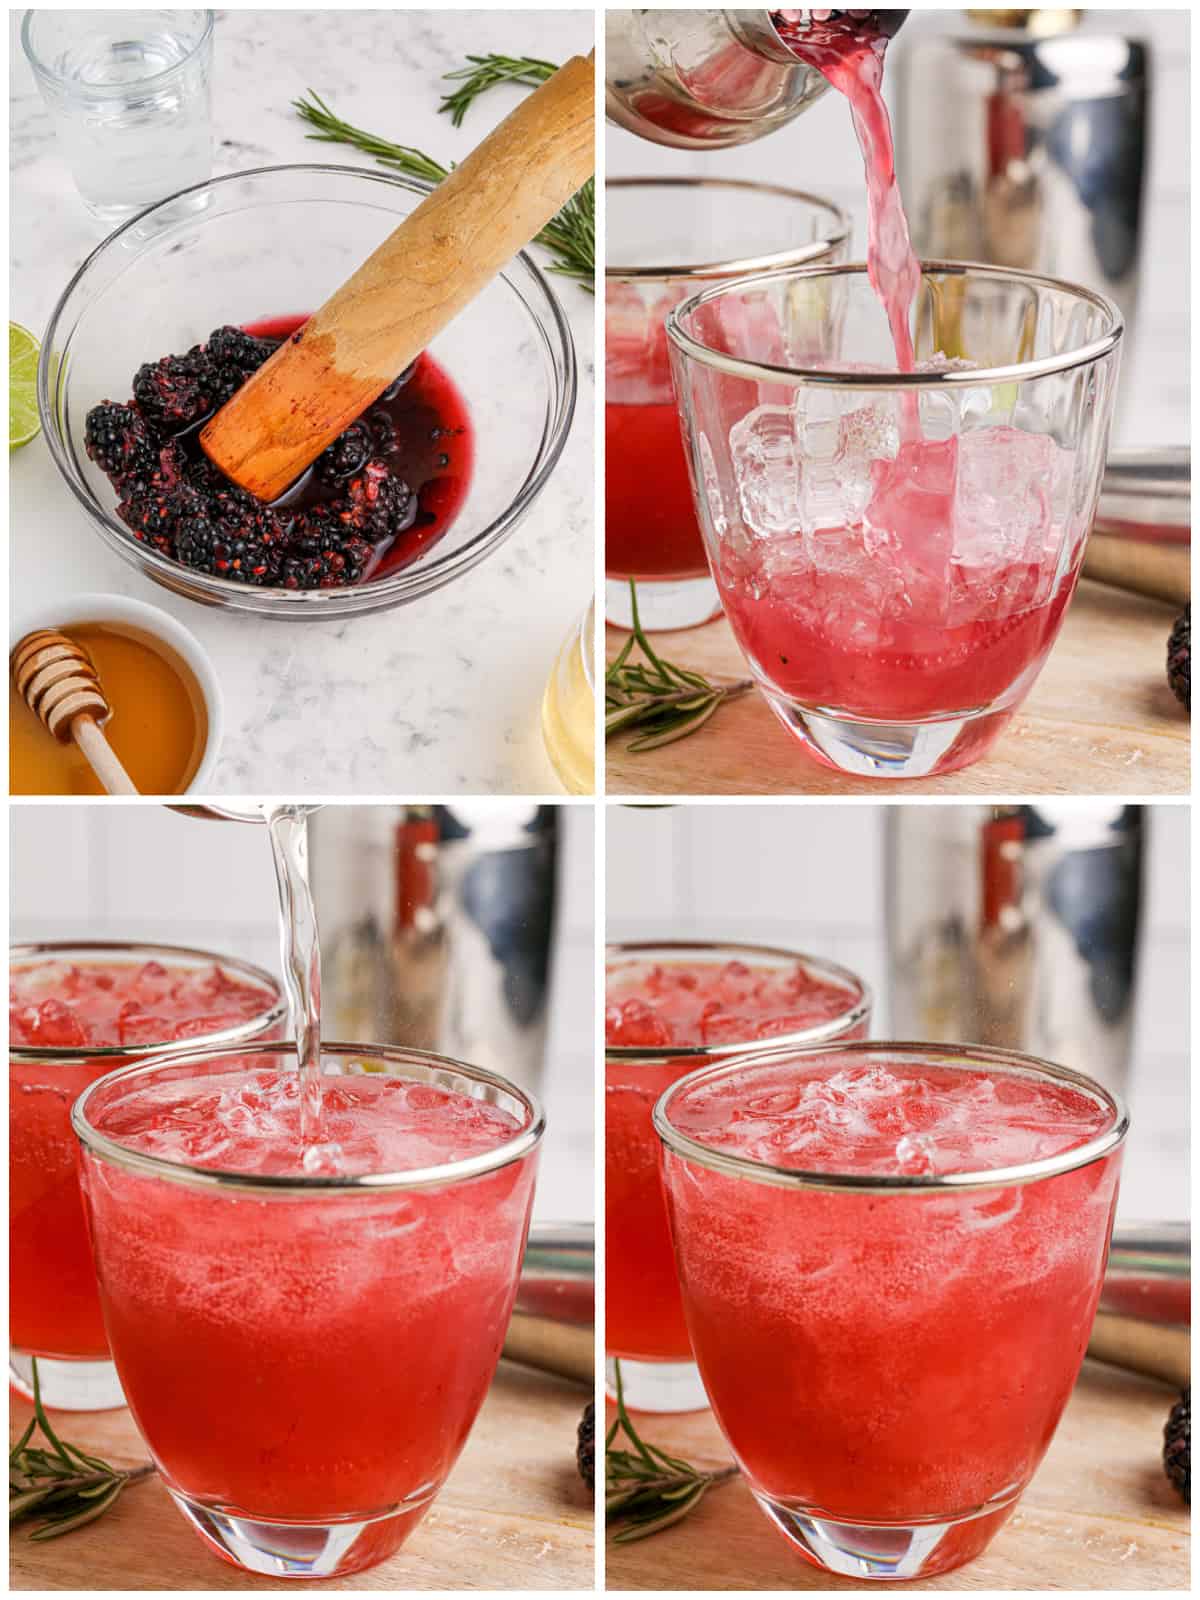 Step by step photos on how to make a Blackberry Bourbon Smash.